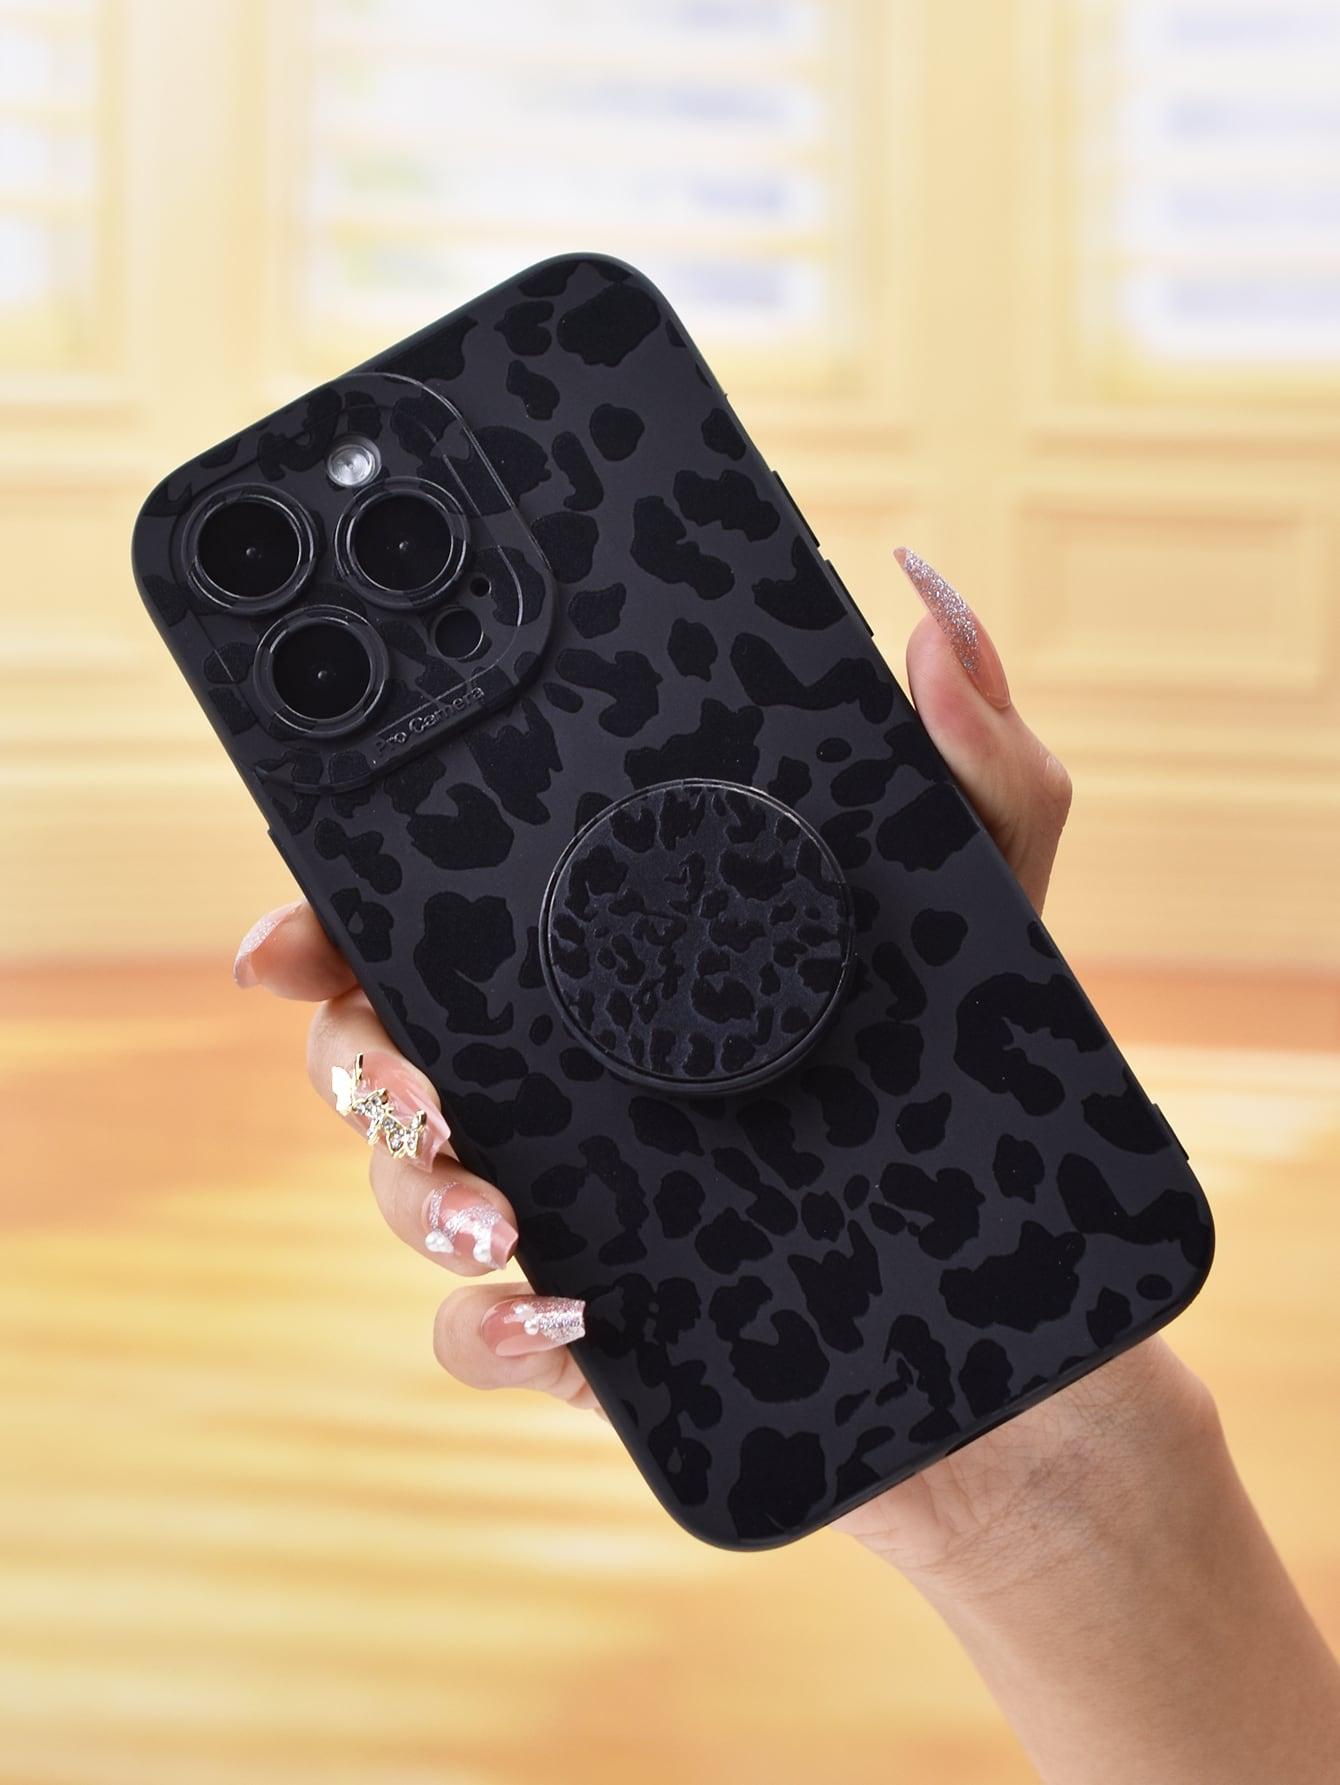 Leopard Print Phone Case With Stand-Out Phone Grip - Decotree.co Online Shop